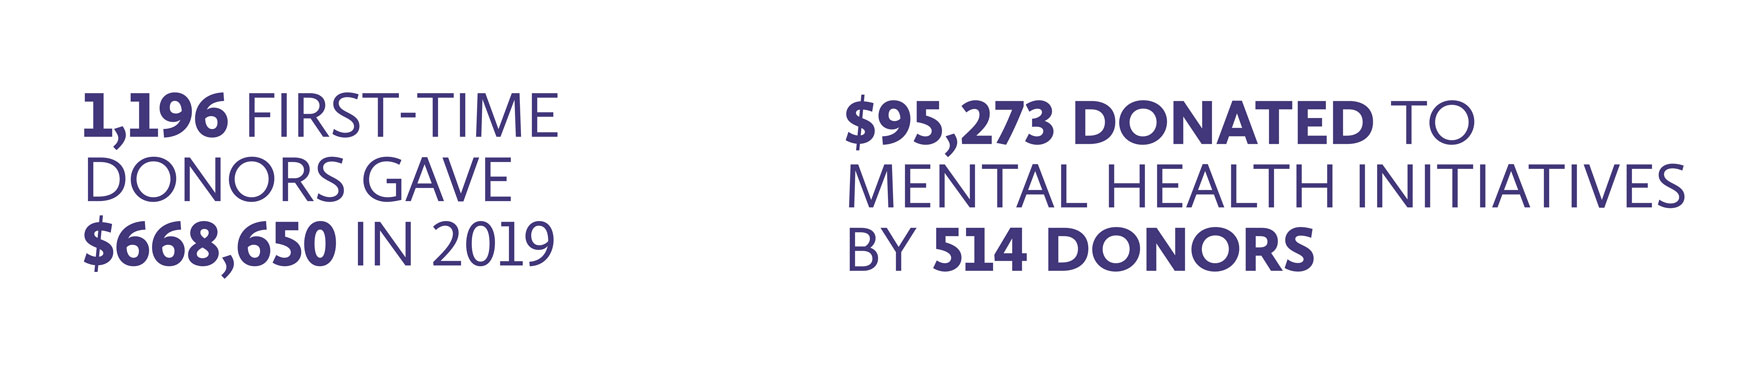 $95,273 donated to mental health initiatives by 514 donors.